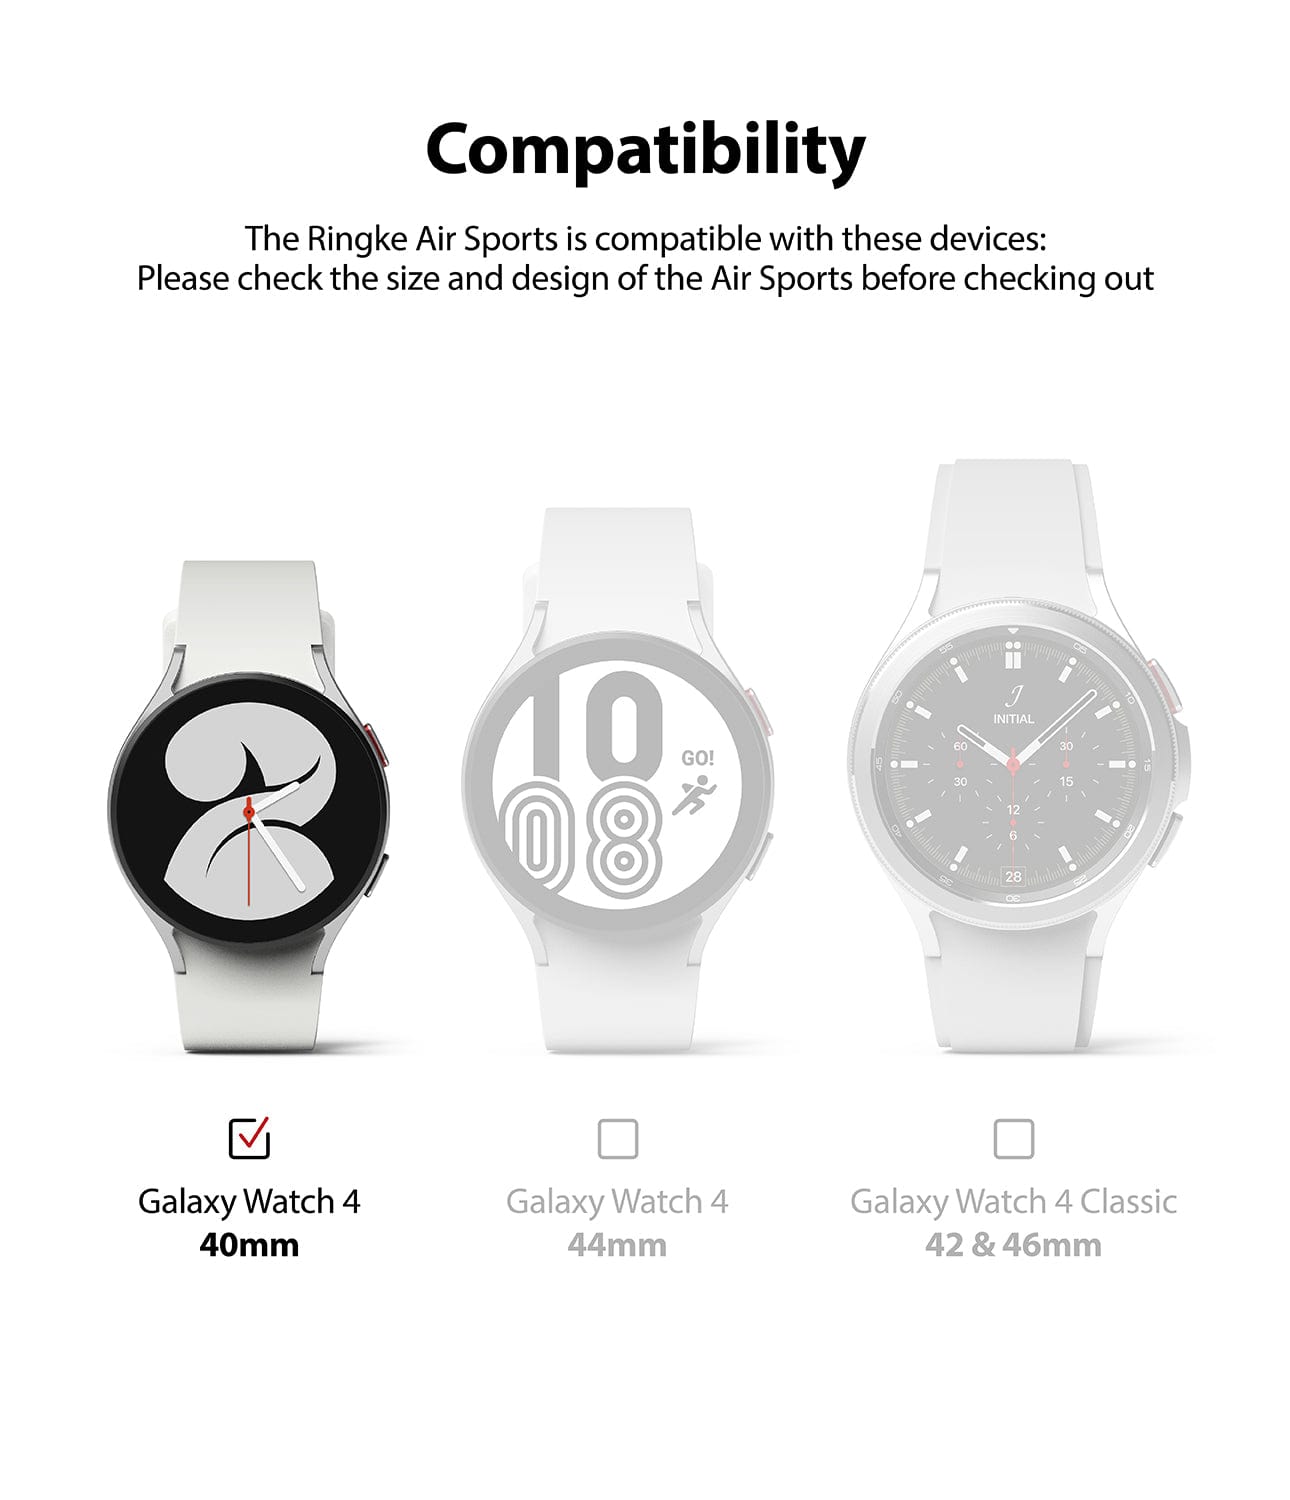 This case is specifically designed to be compatible with the Galaxy Watch 4 in the 40mm size only.